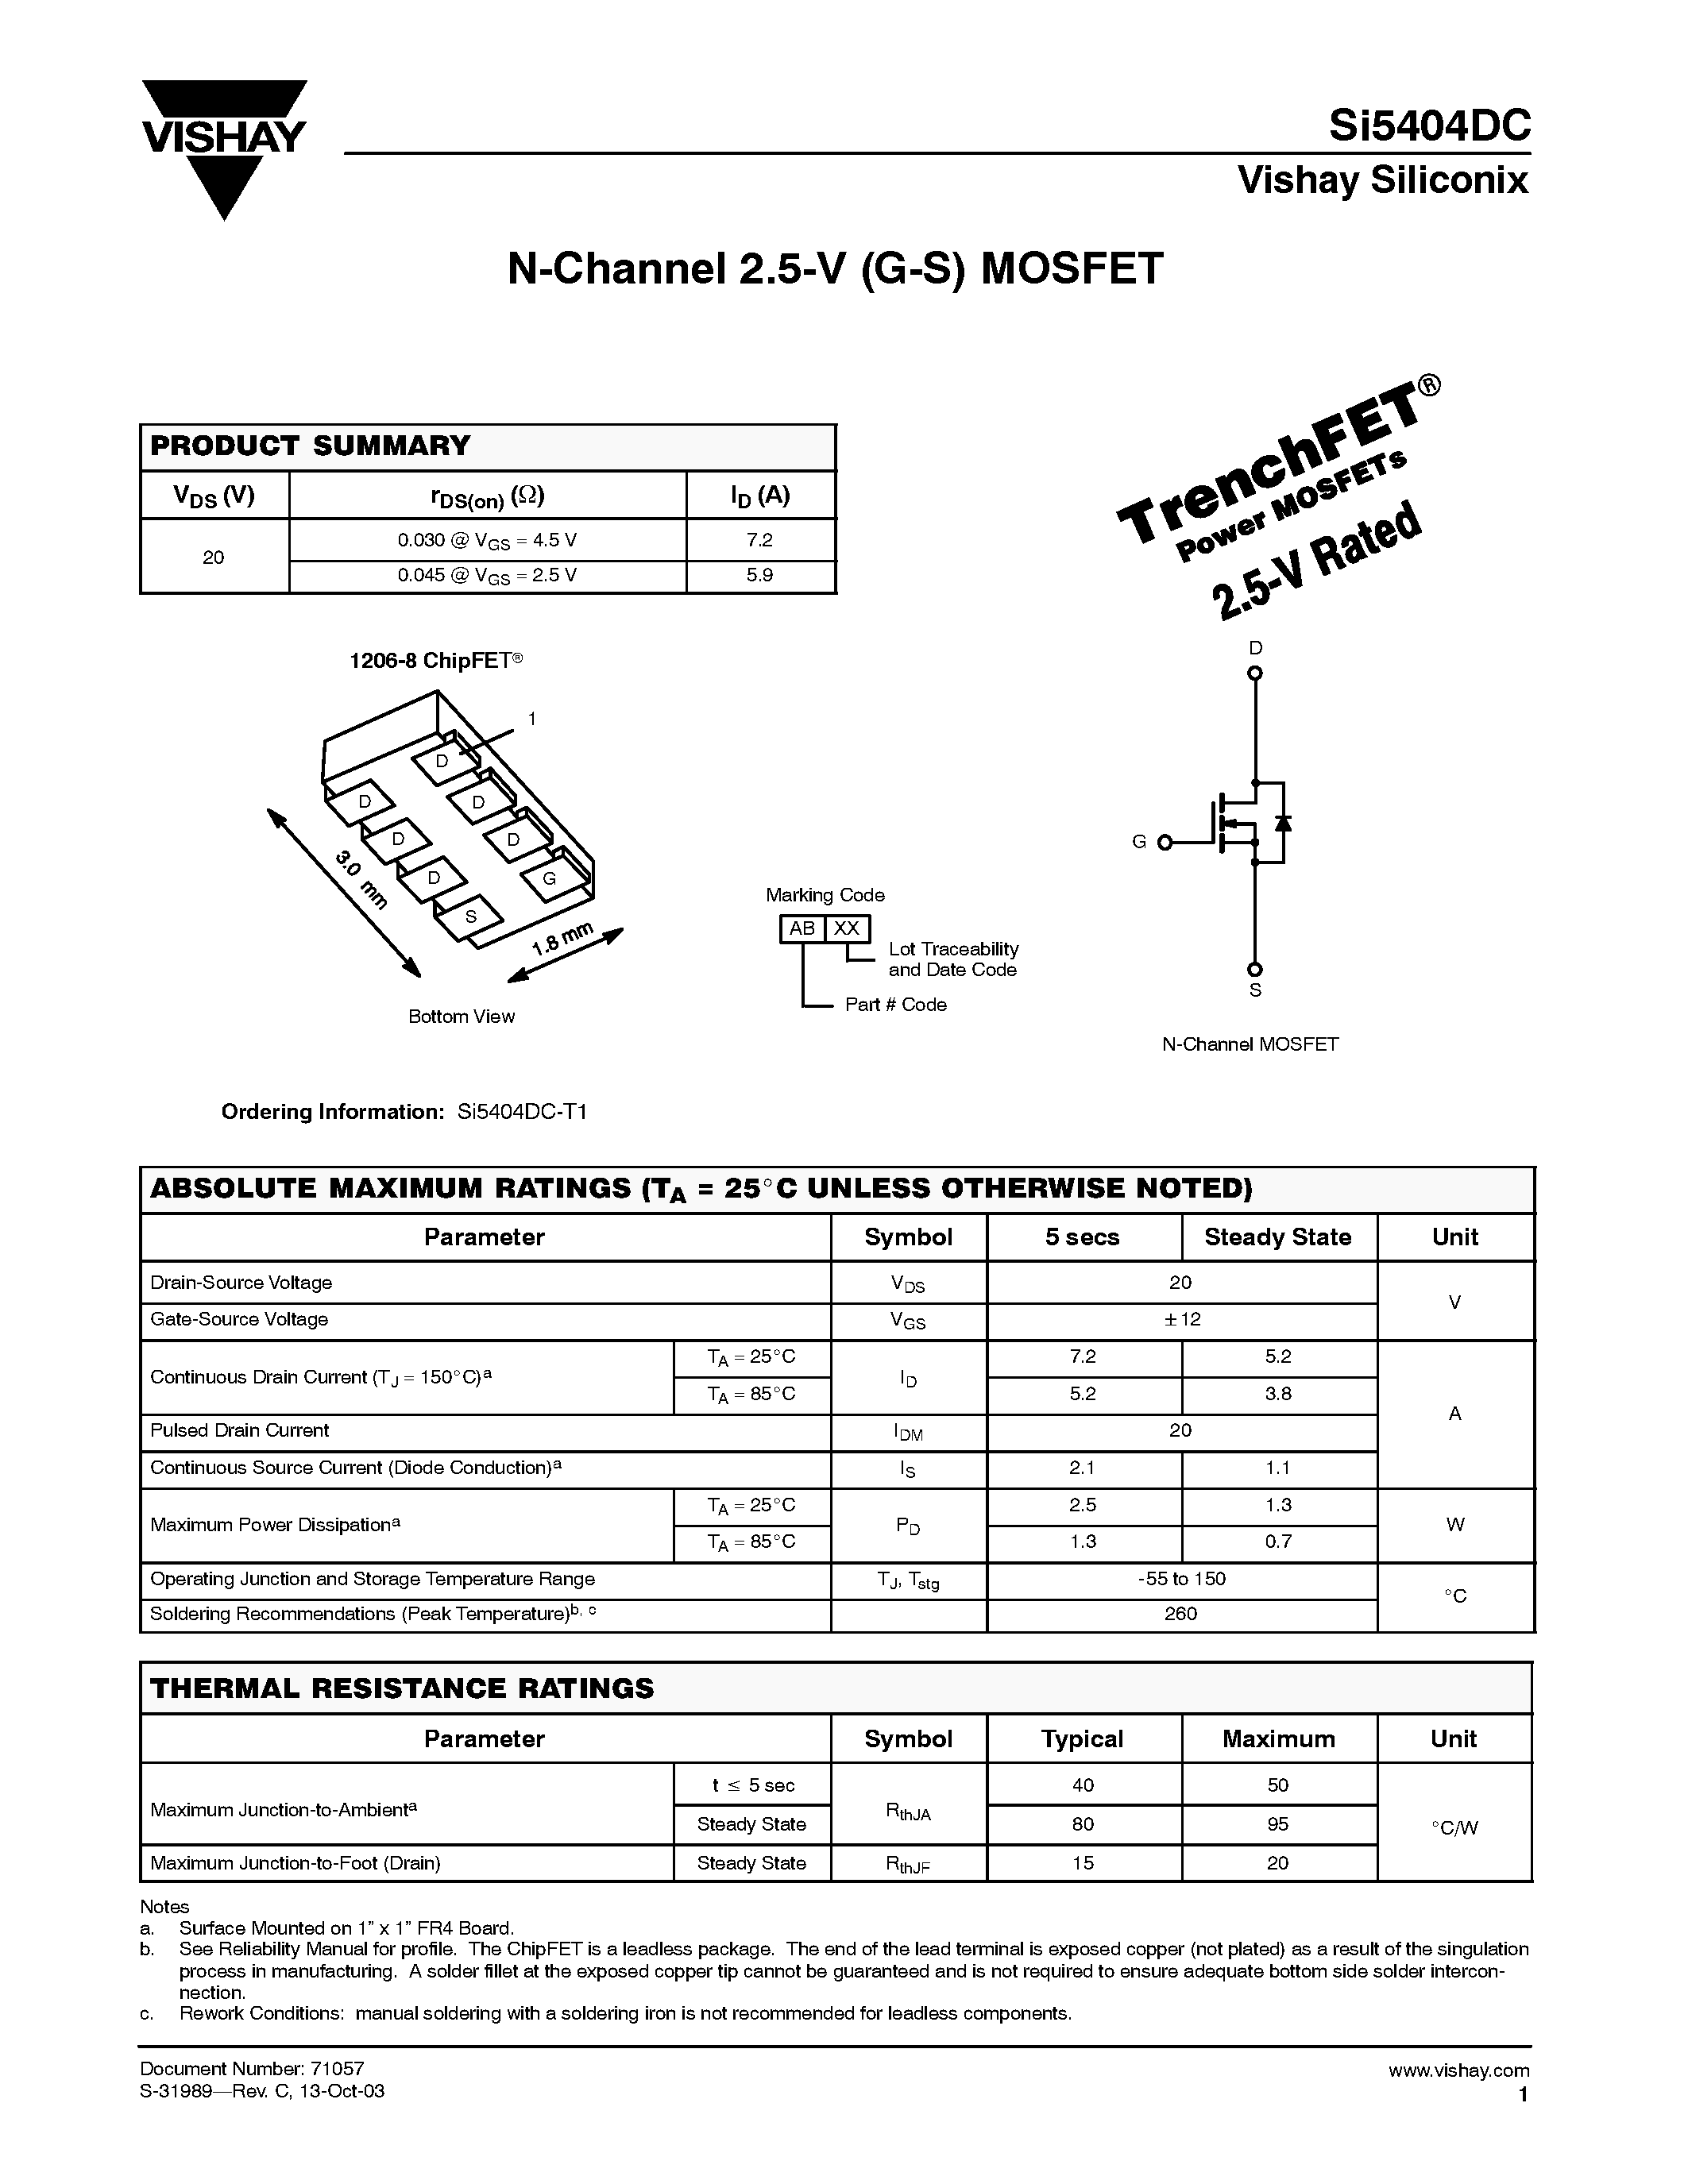 Даташит Si5404DC-T1 - N-Channel 2.5-V (G-S) MOSFET страница 1